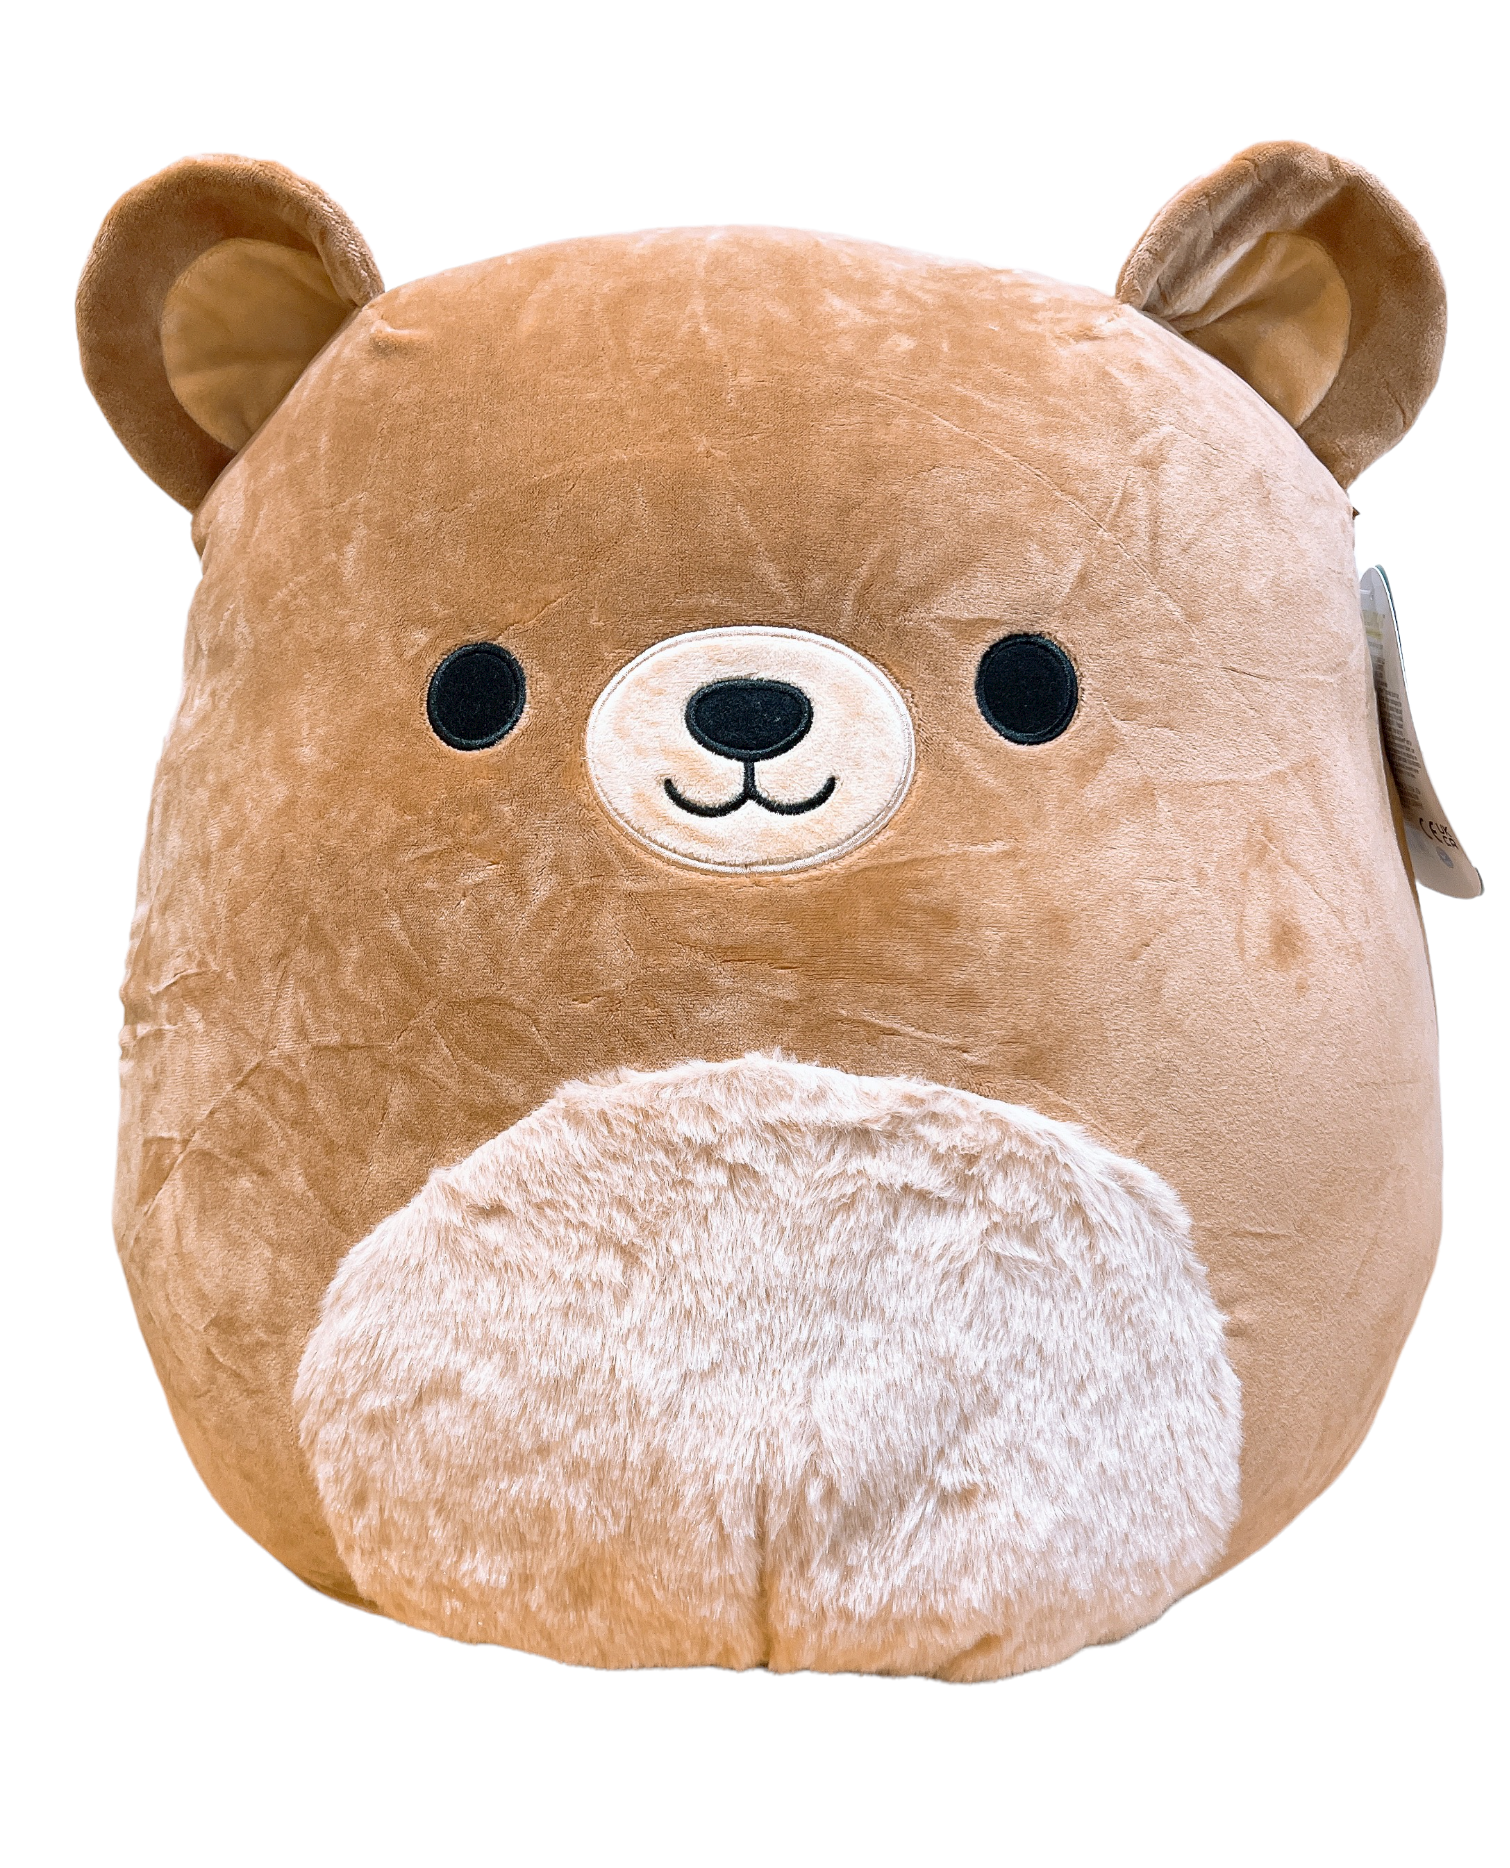 16" Kellytoy Squishmallows Omar The Brown Bear soft doll toy 